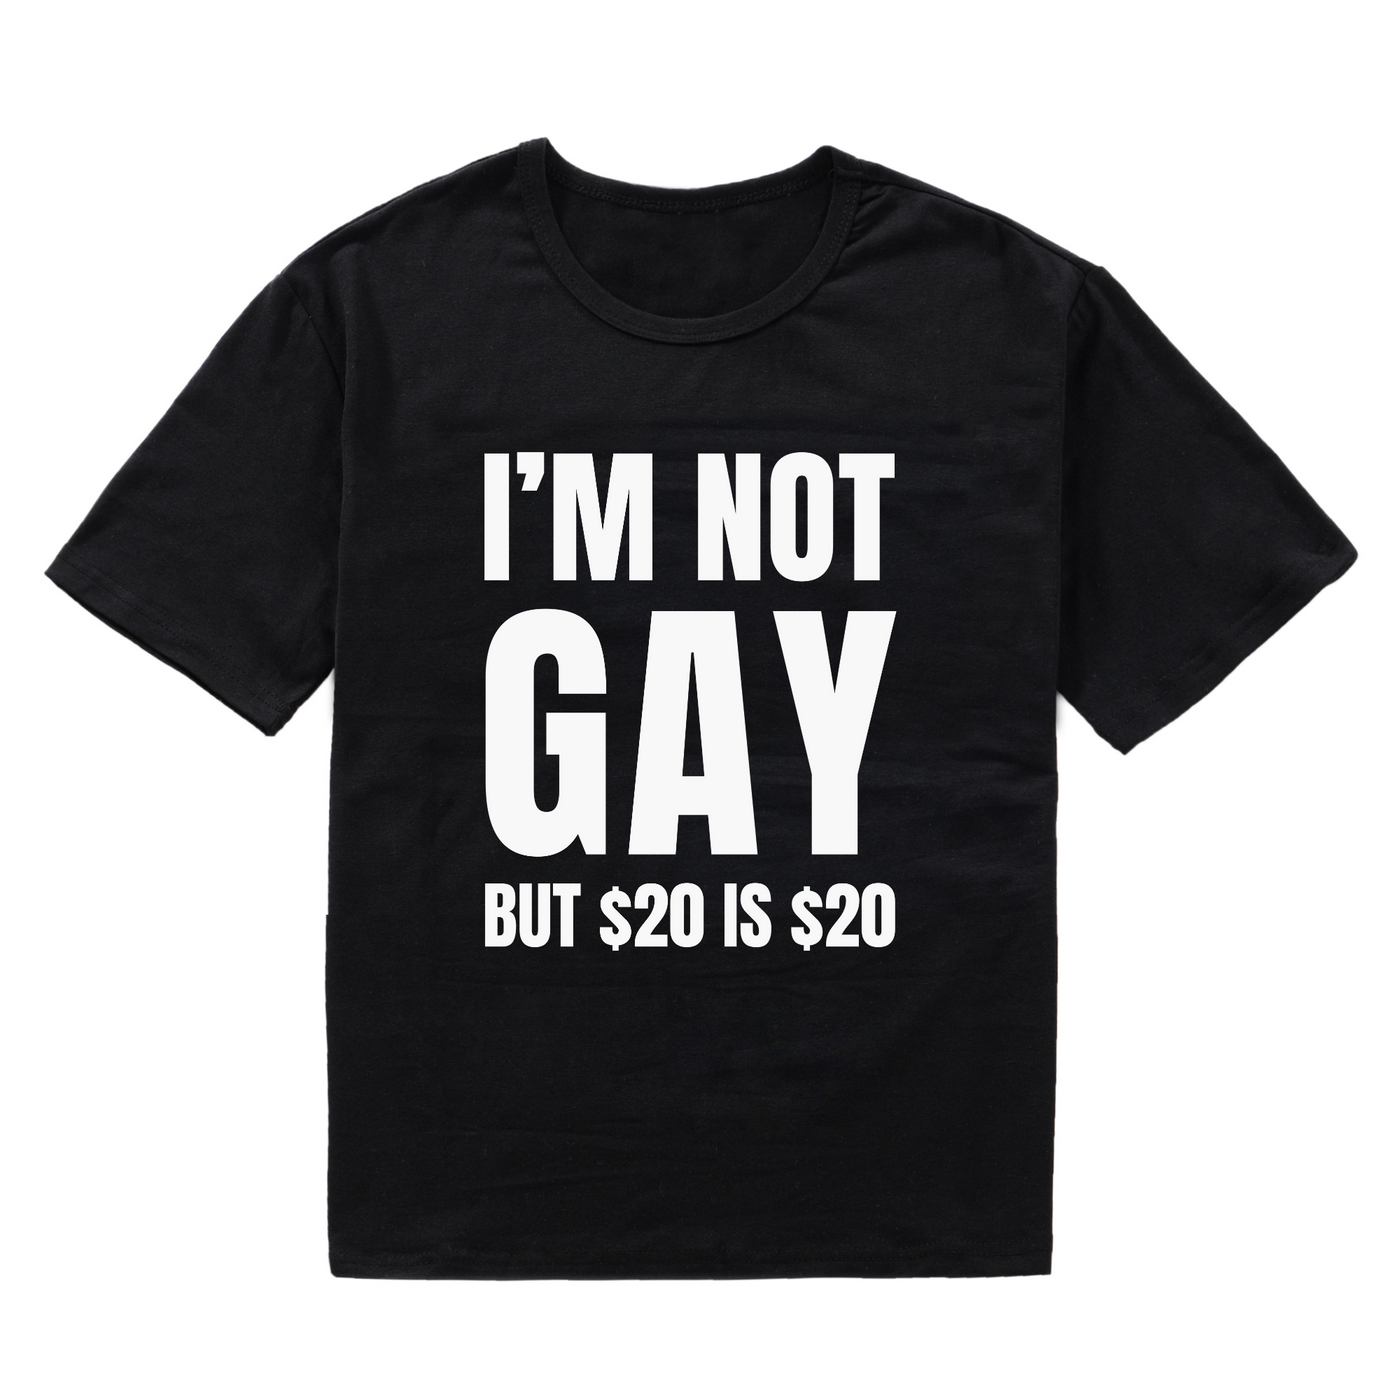 I'm Not Gay But $20 Is $20